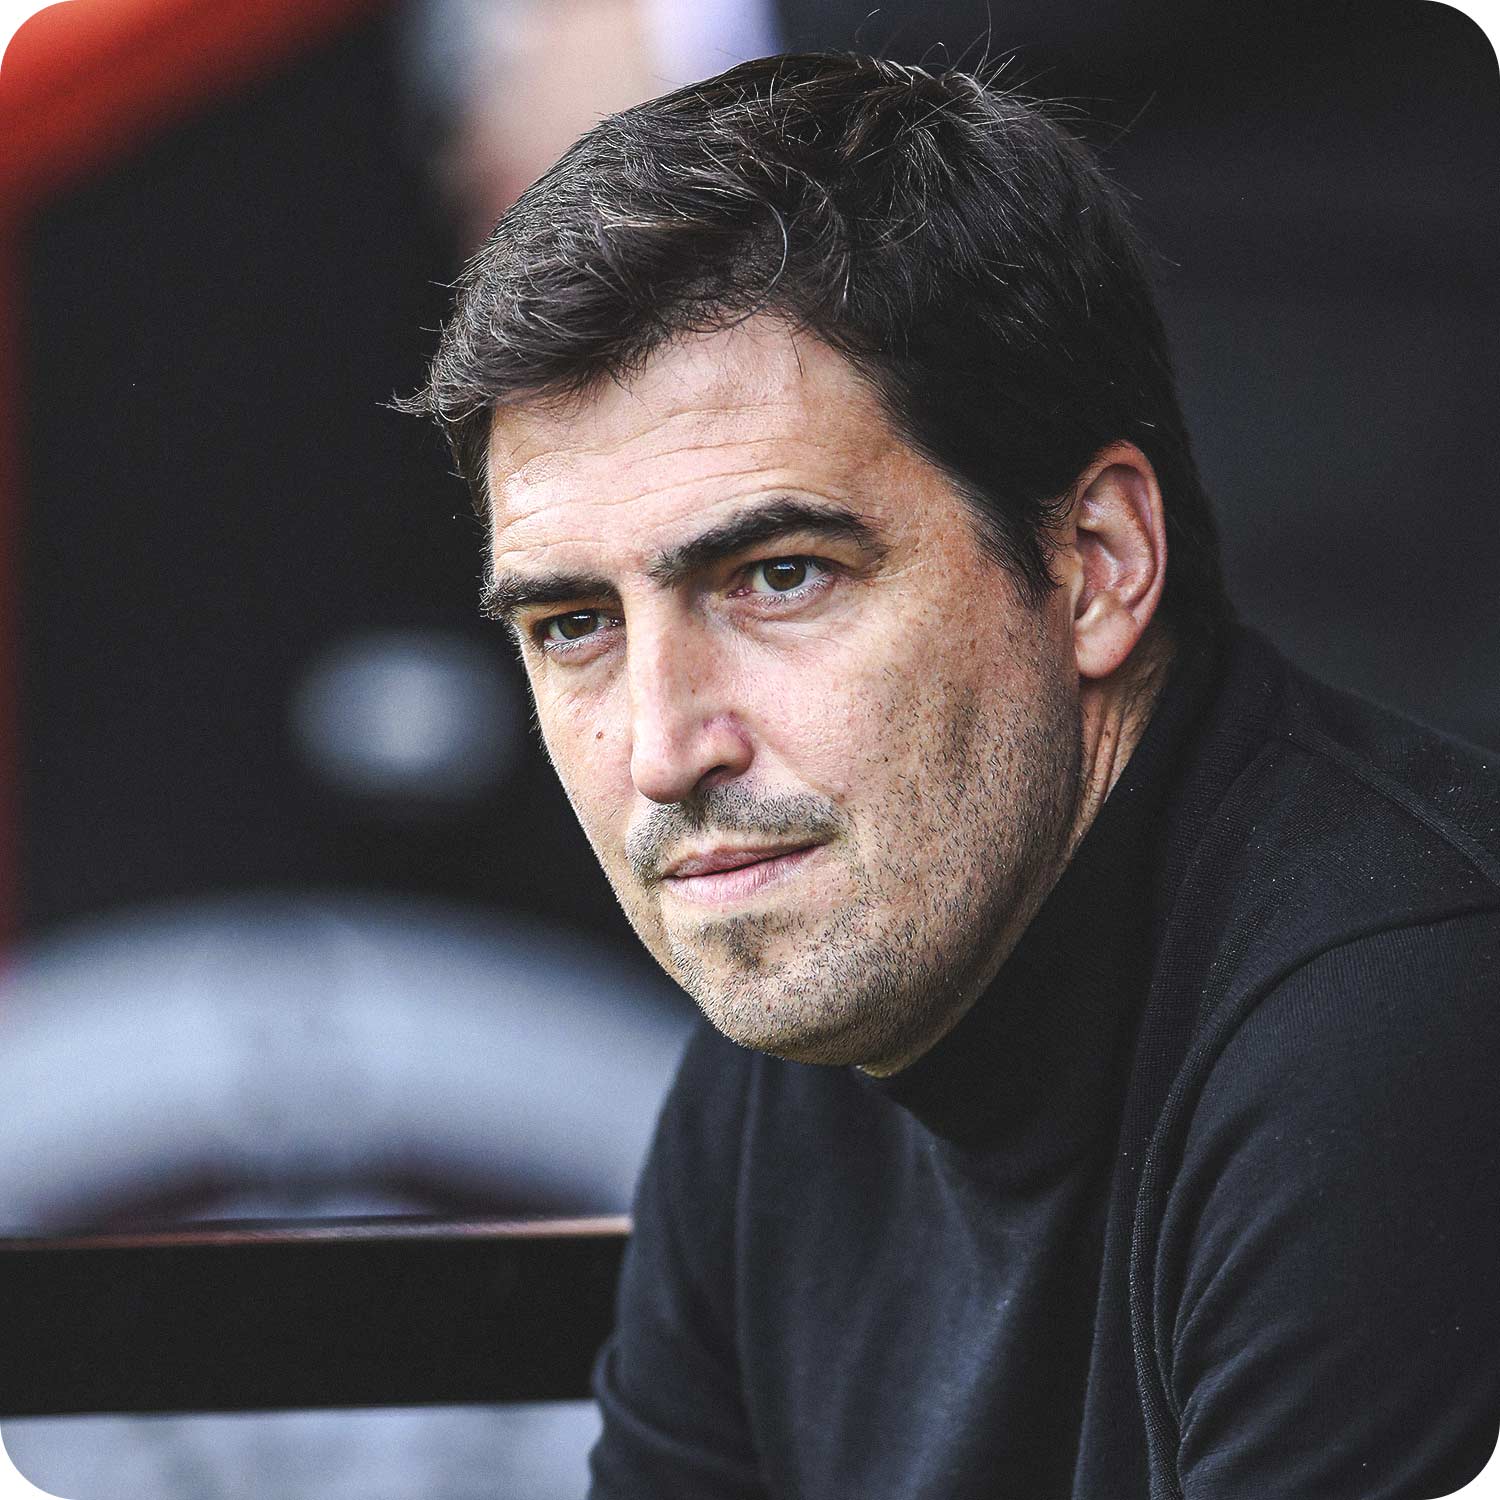 Photograph of the Bournemouth Manager, Andoni Iraola.